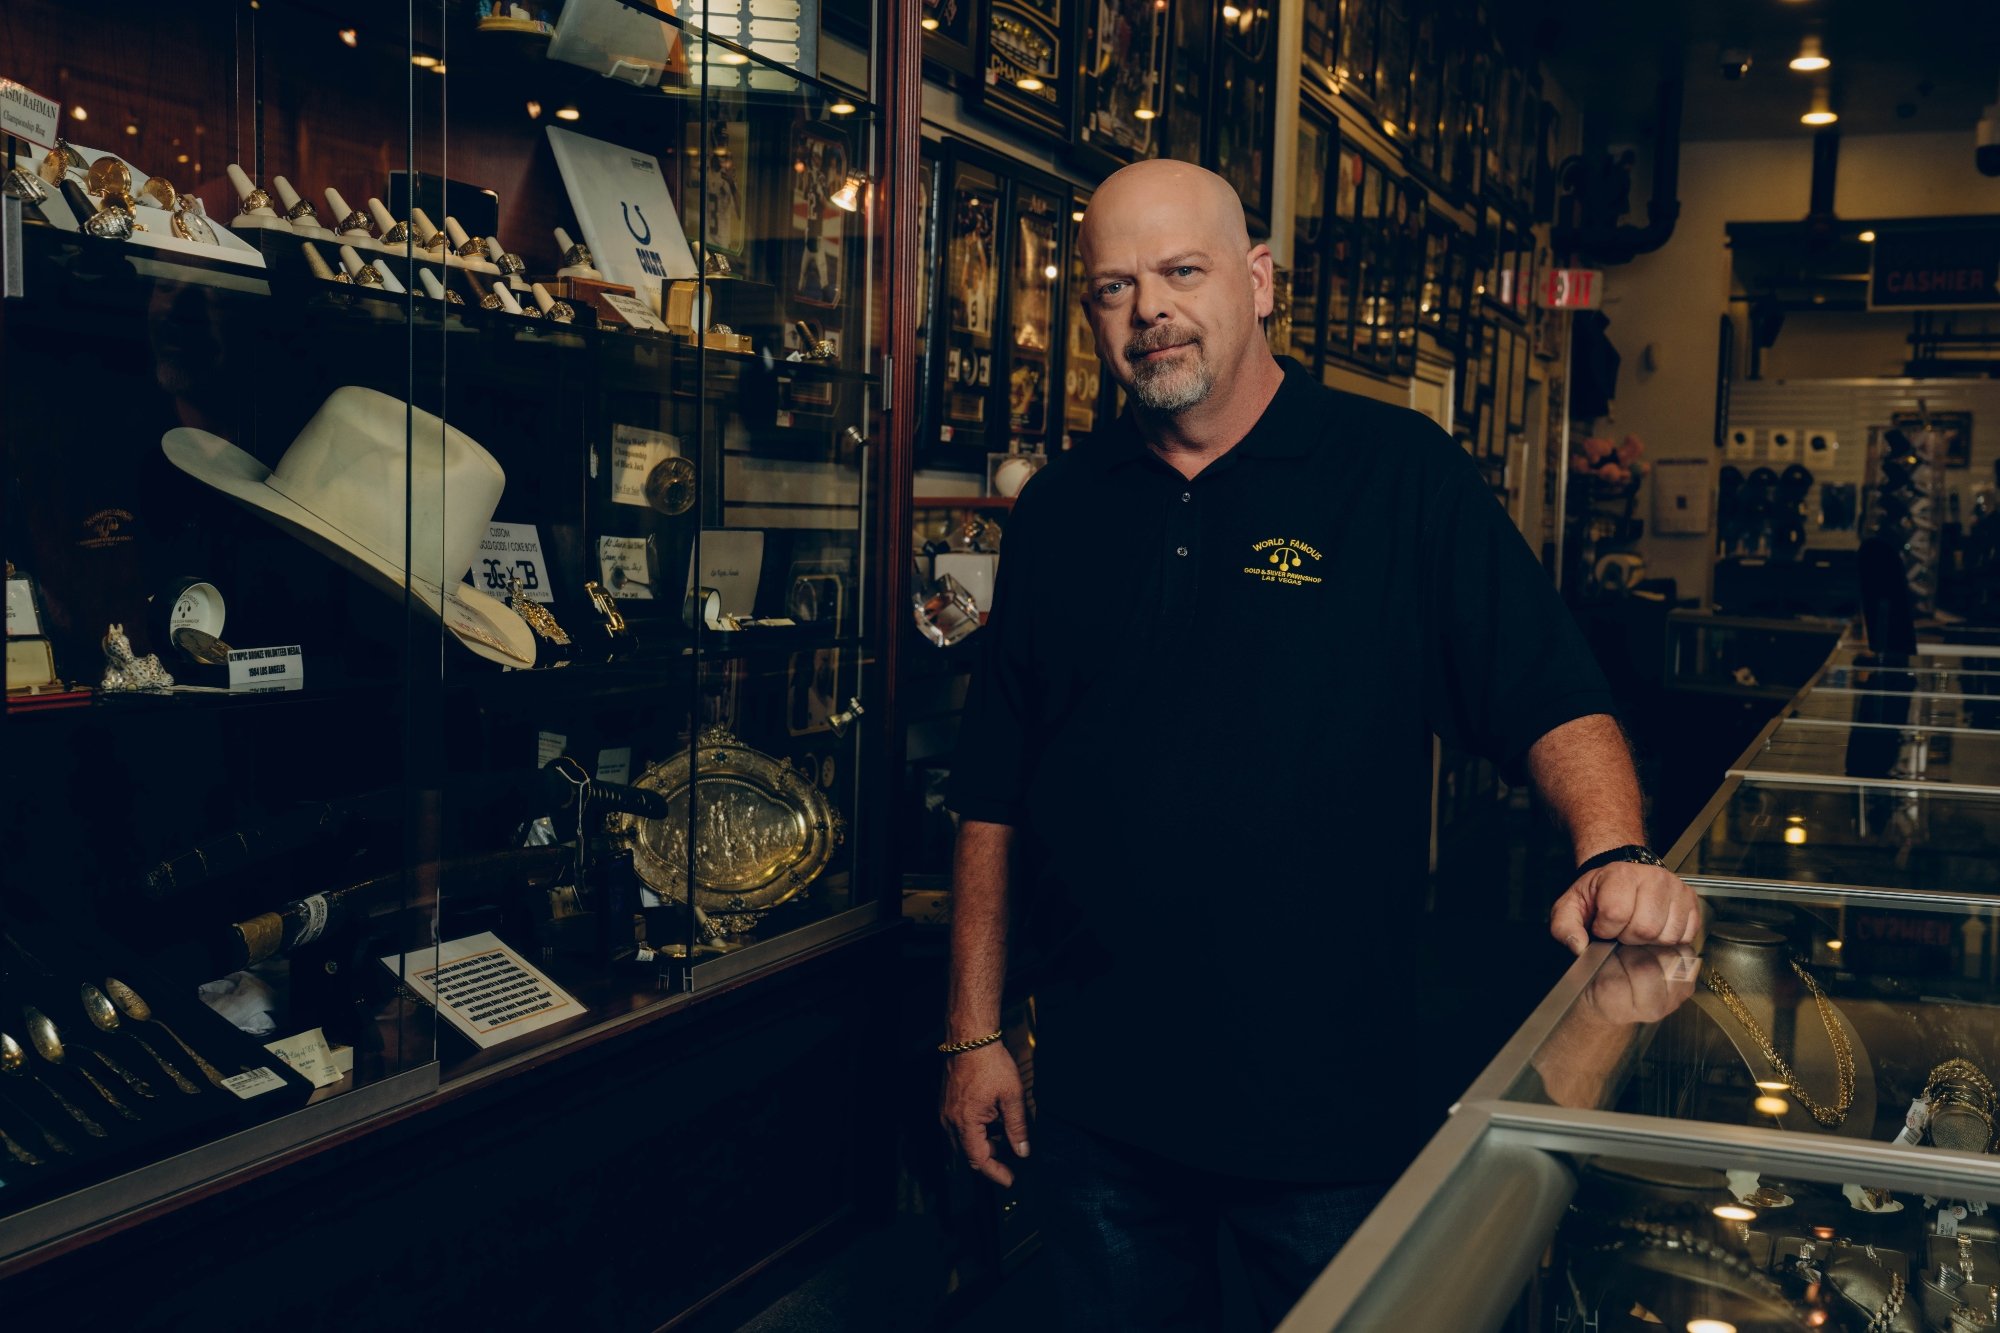 'Pawn Stars' Rick Harrison wearing the shop uniform. He has his hand resting on the glass showcase surrounded by items.